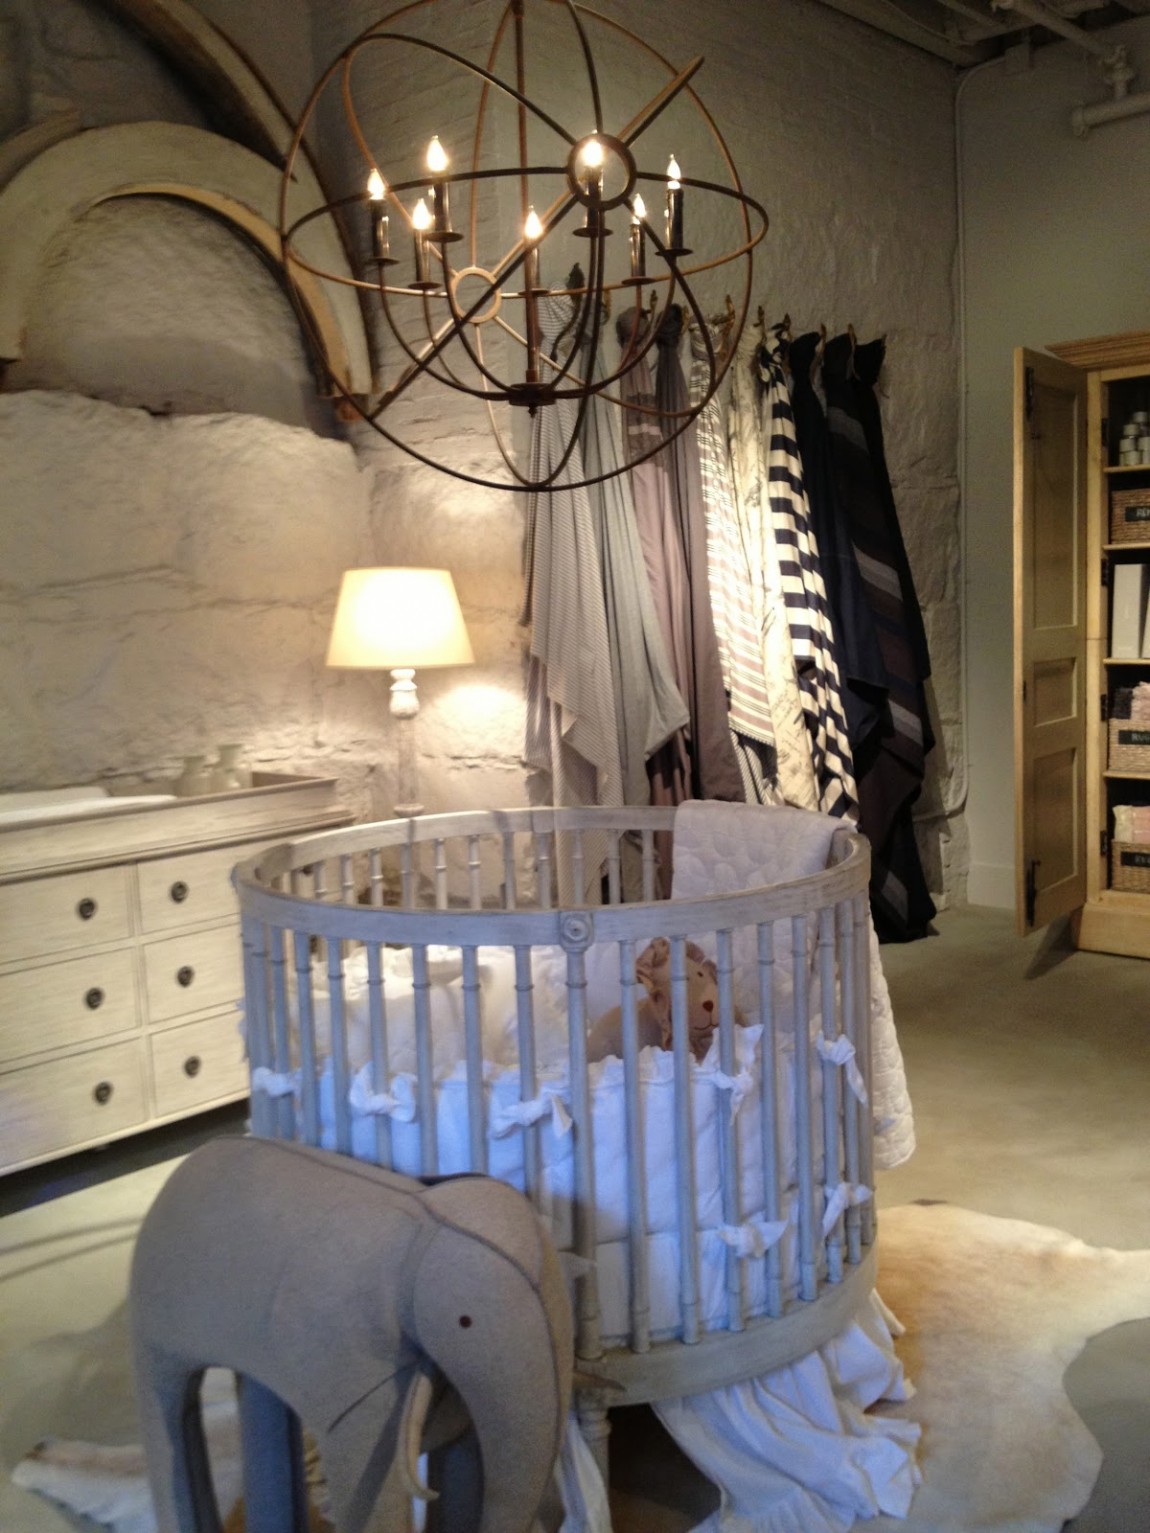 Home Baby With Warm Home Baby Room Designed With Unique Textured Grey Wall Hit By White Skirted Round Crib With Chandelier Decoration  Adorable Round Crib Decorated By Vintage Ornaments In Small Room